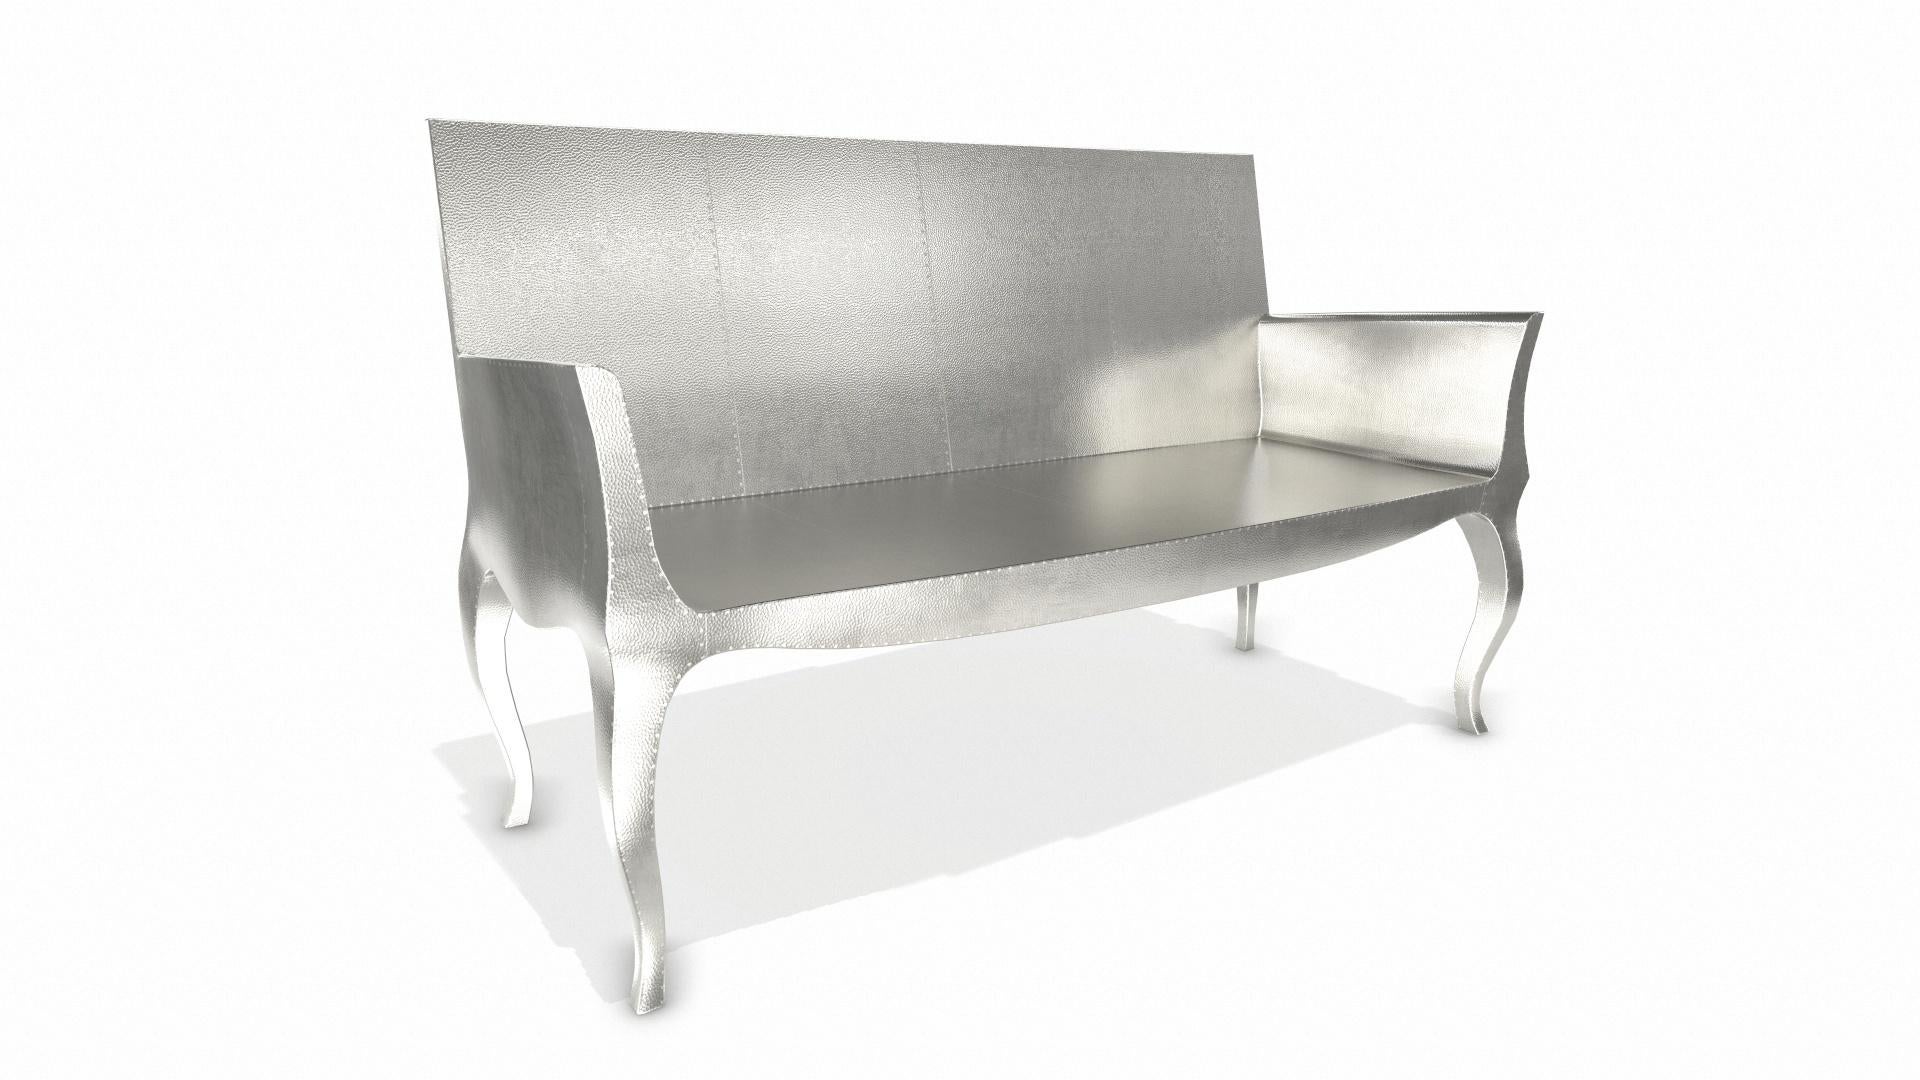 Contemporary Louise Settee Art Deco Benches in Mid. Hammered White Bronze by Paul Mathieu For Sale